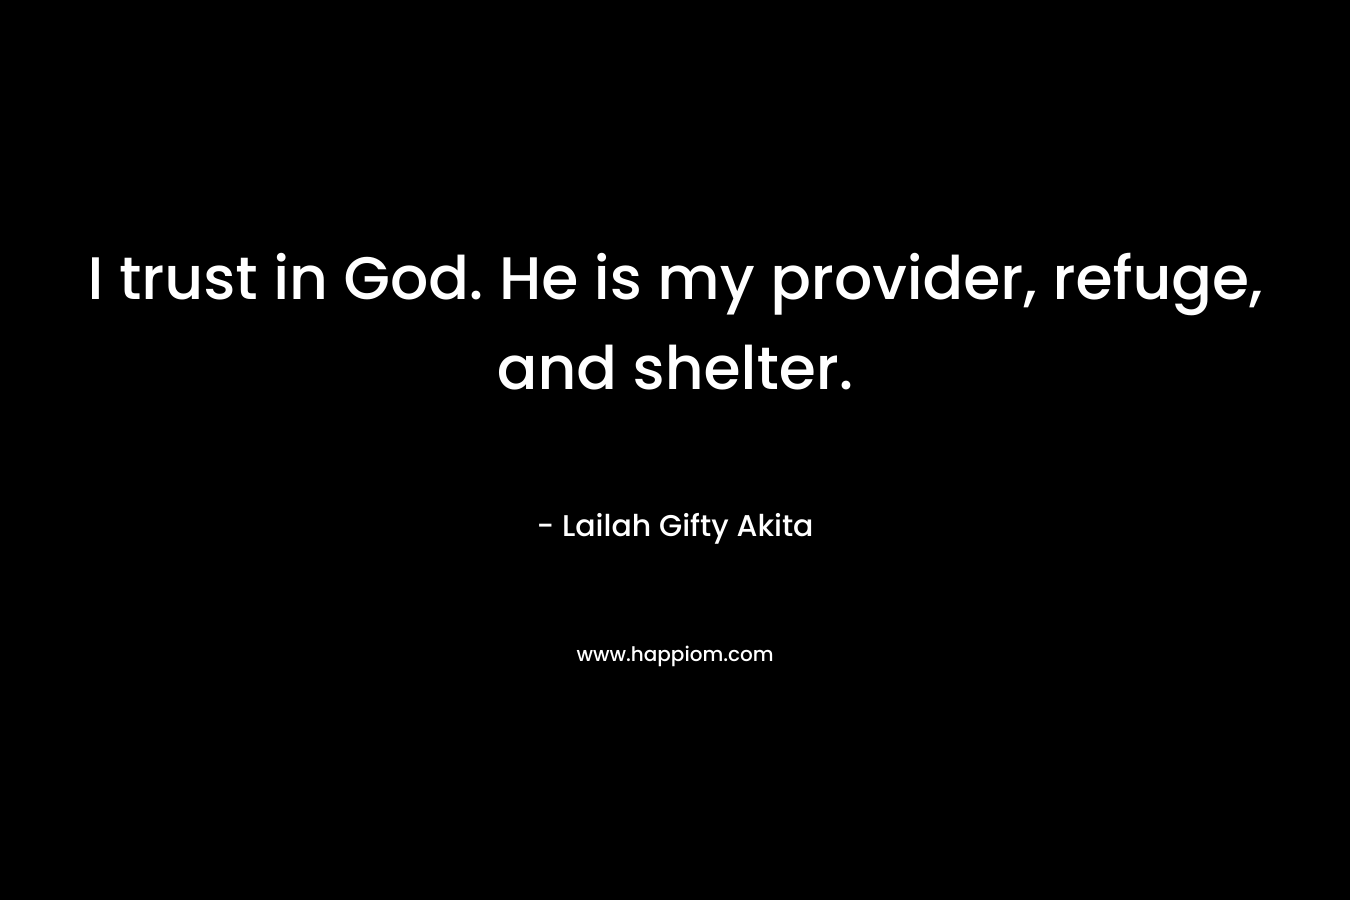 I trust in God. He is my provider, refuge, and shelter.